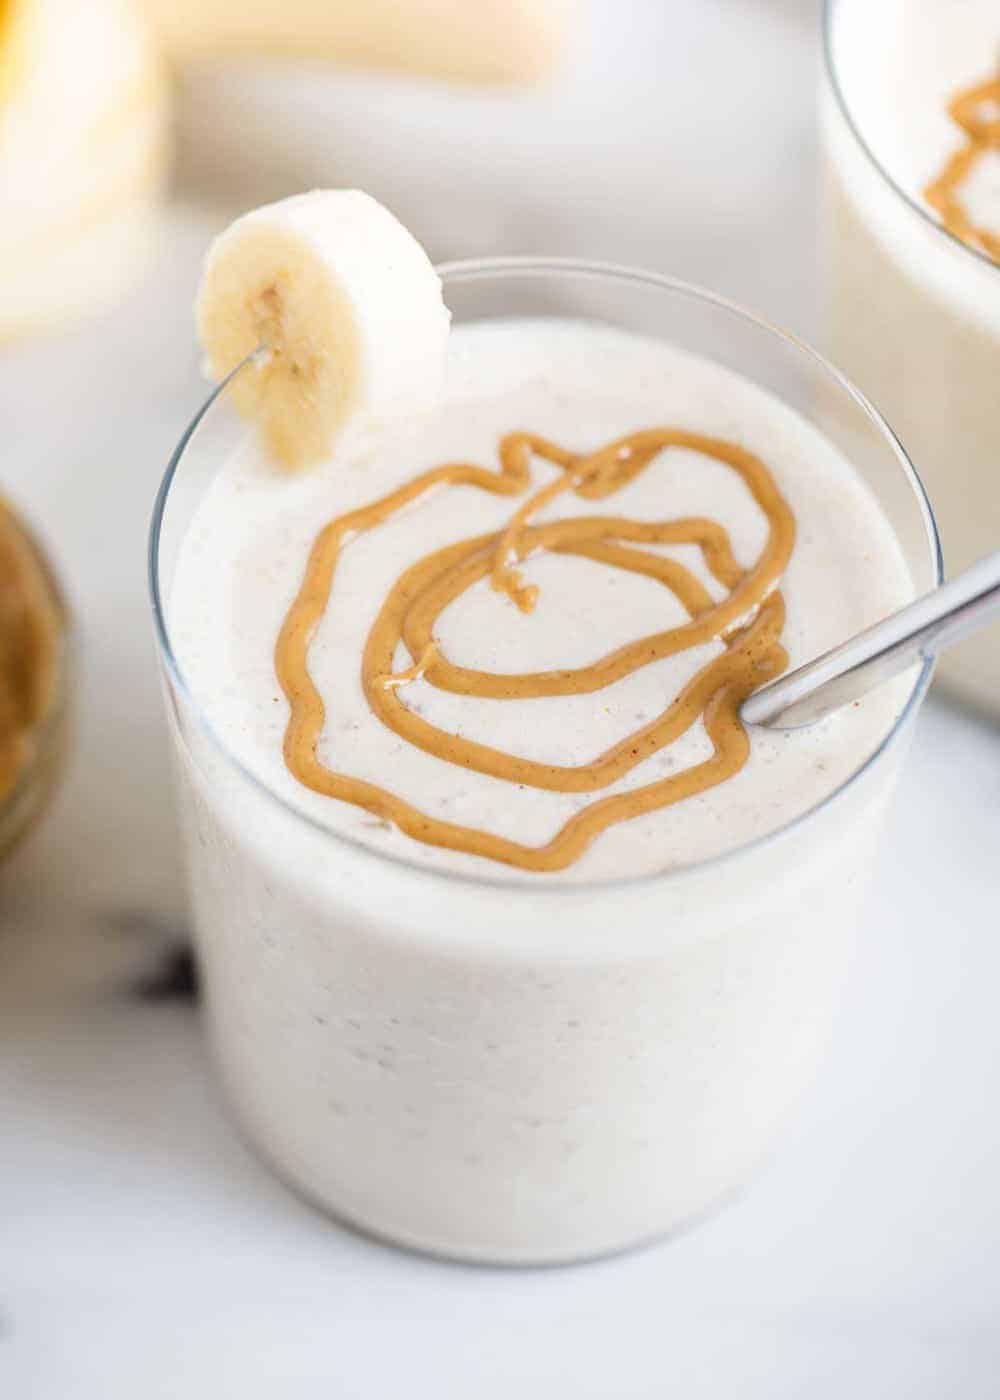 Peanut butter banana smoothie with a peanut butter drizzle on top.